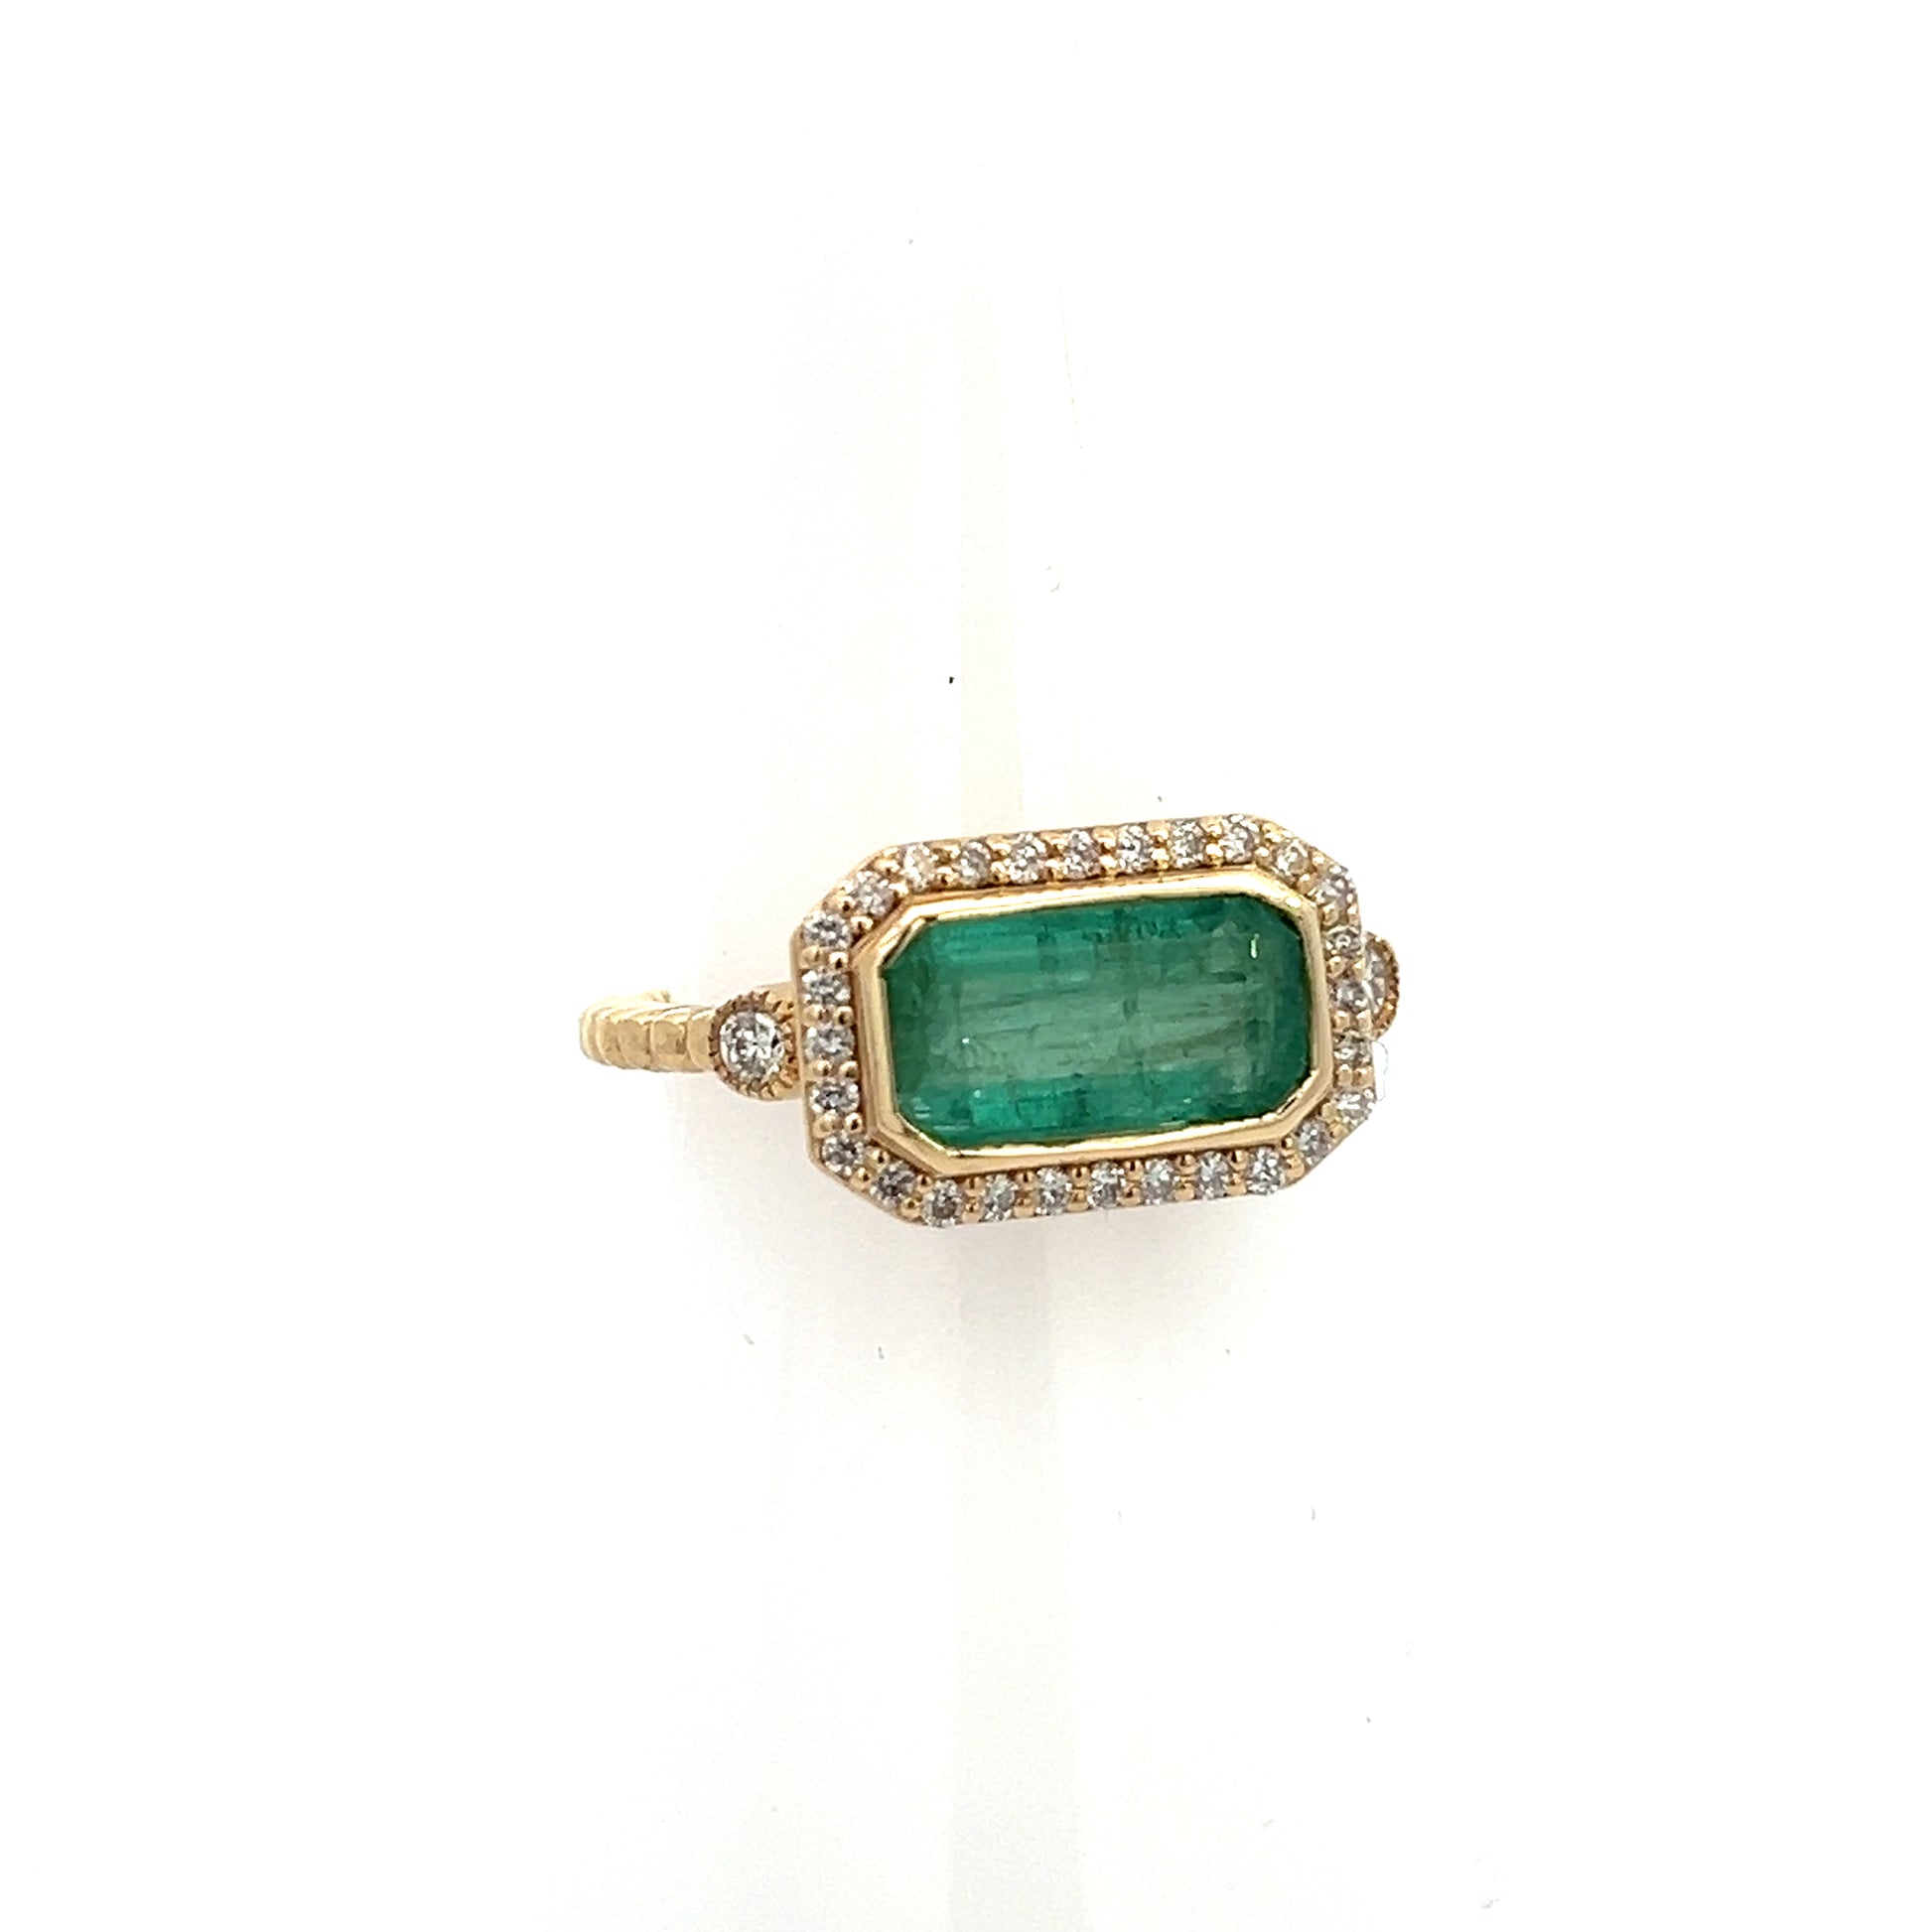 Natural Emerald and Diamond Ring 6.5 14k Y Gold 2.32 TCW Certified $4,950 310644 - Certified Fine Jewelry